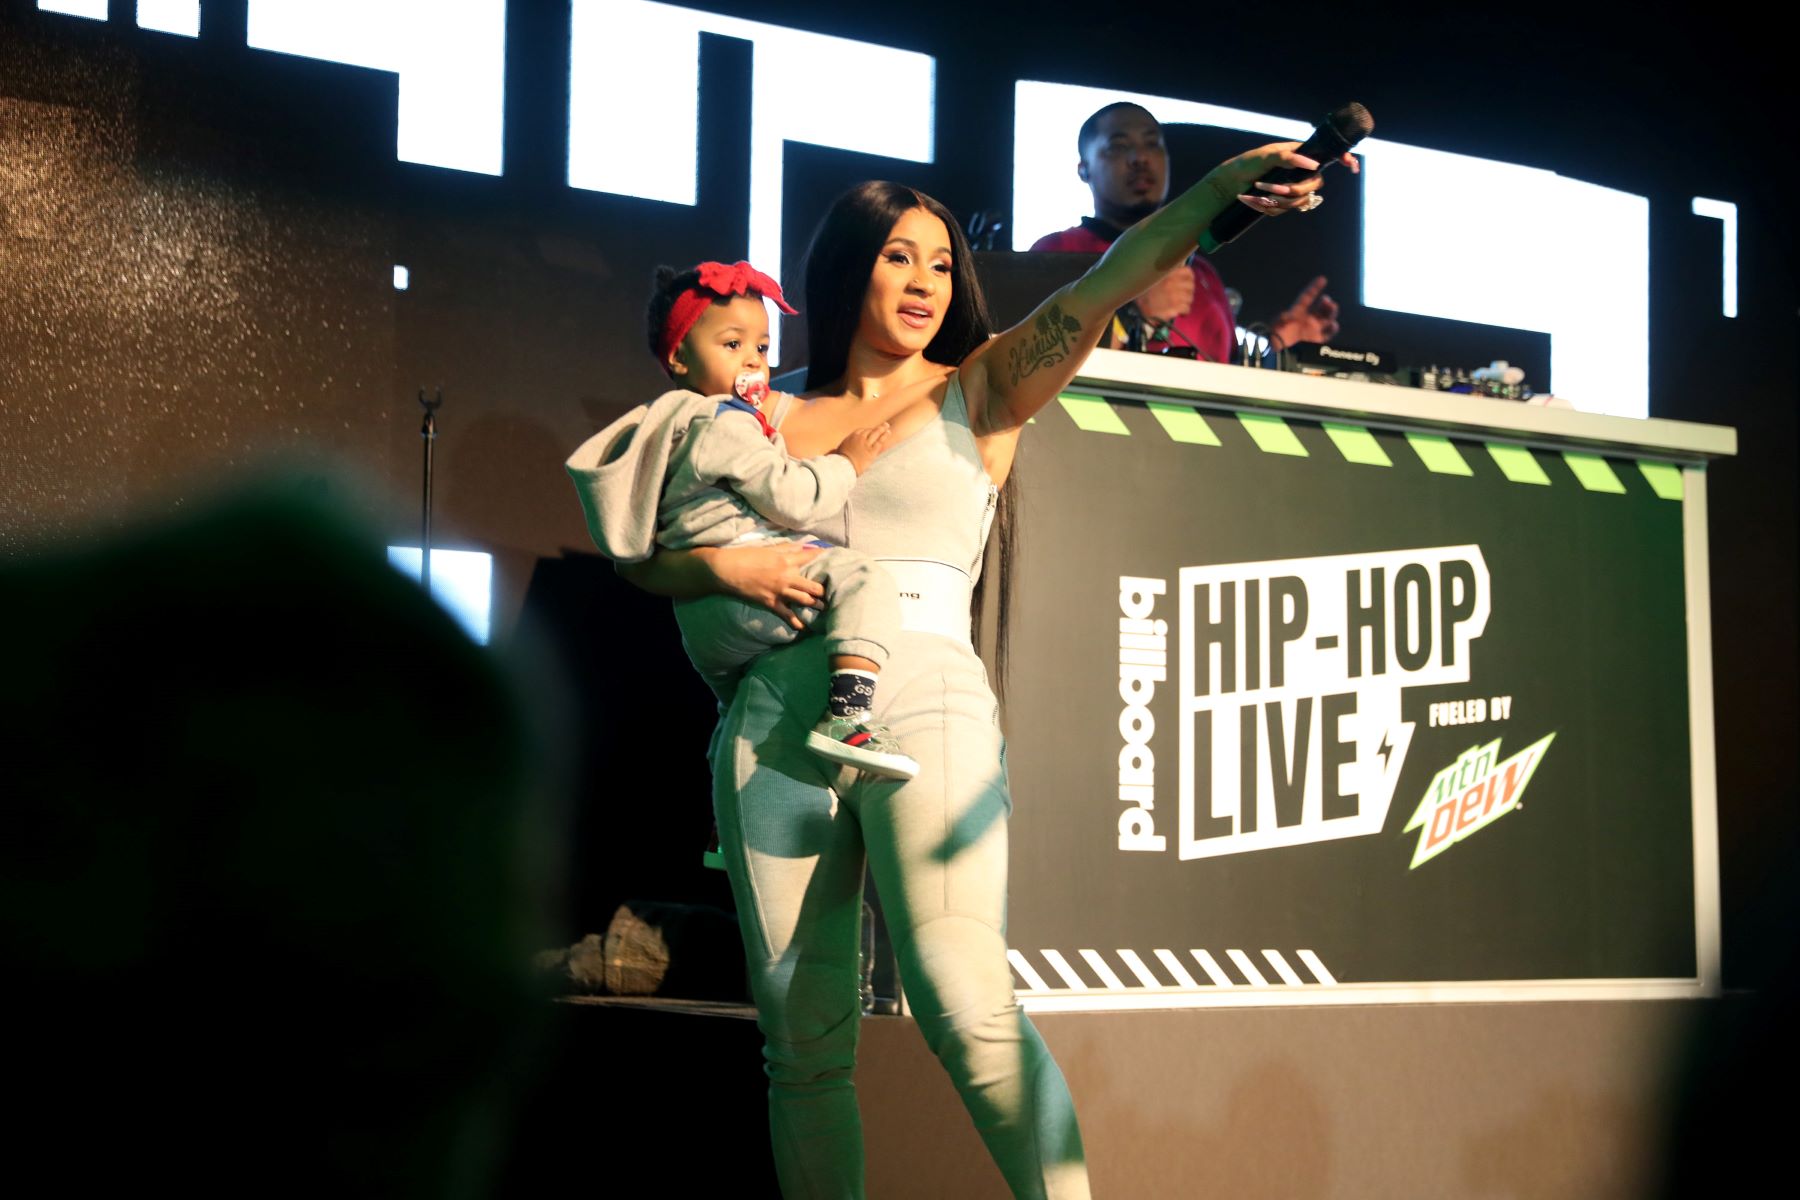 Cardi B with her baby Kulture performing at Offset In Concert at Sony Hall in New York City